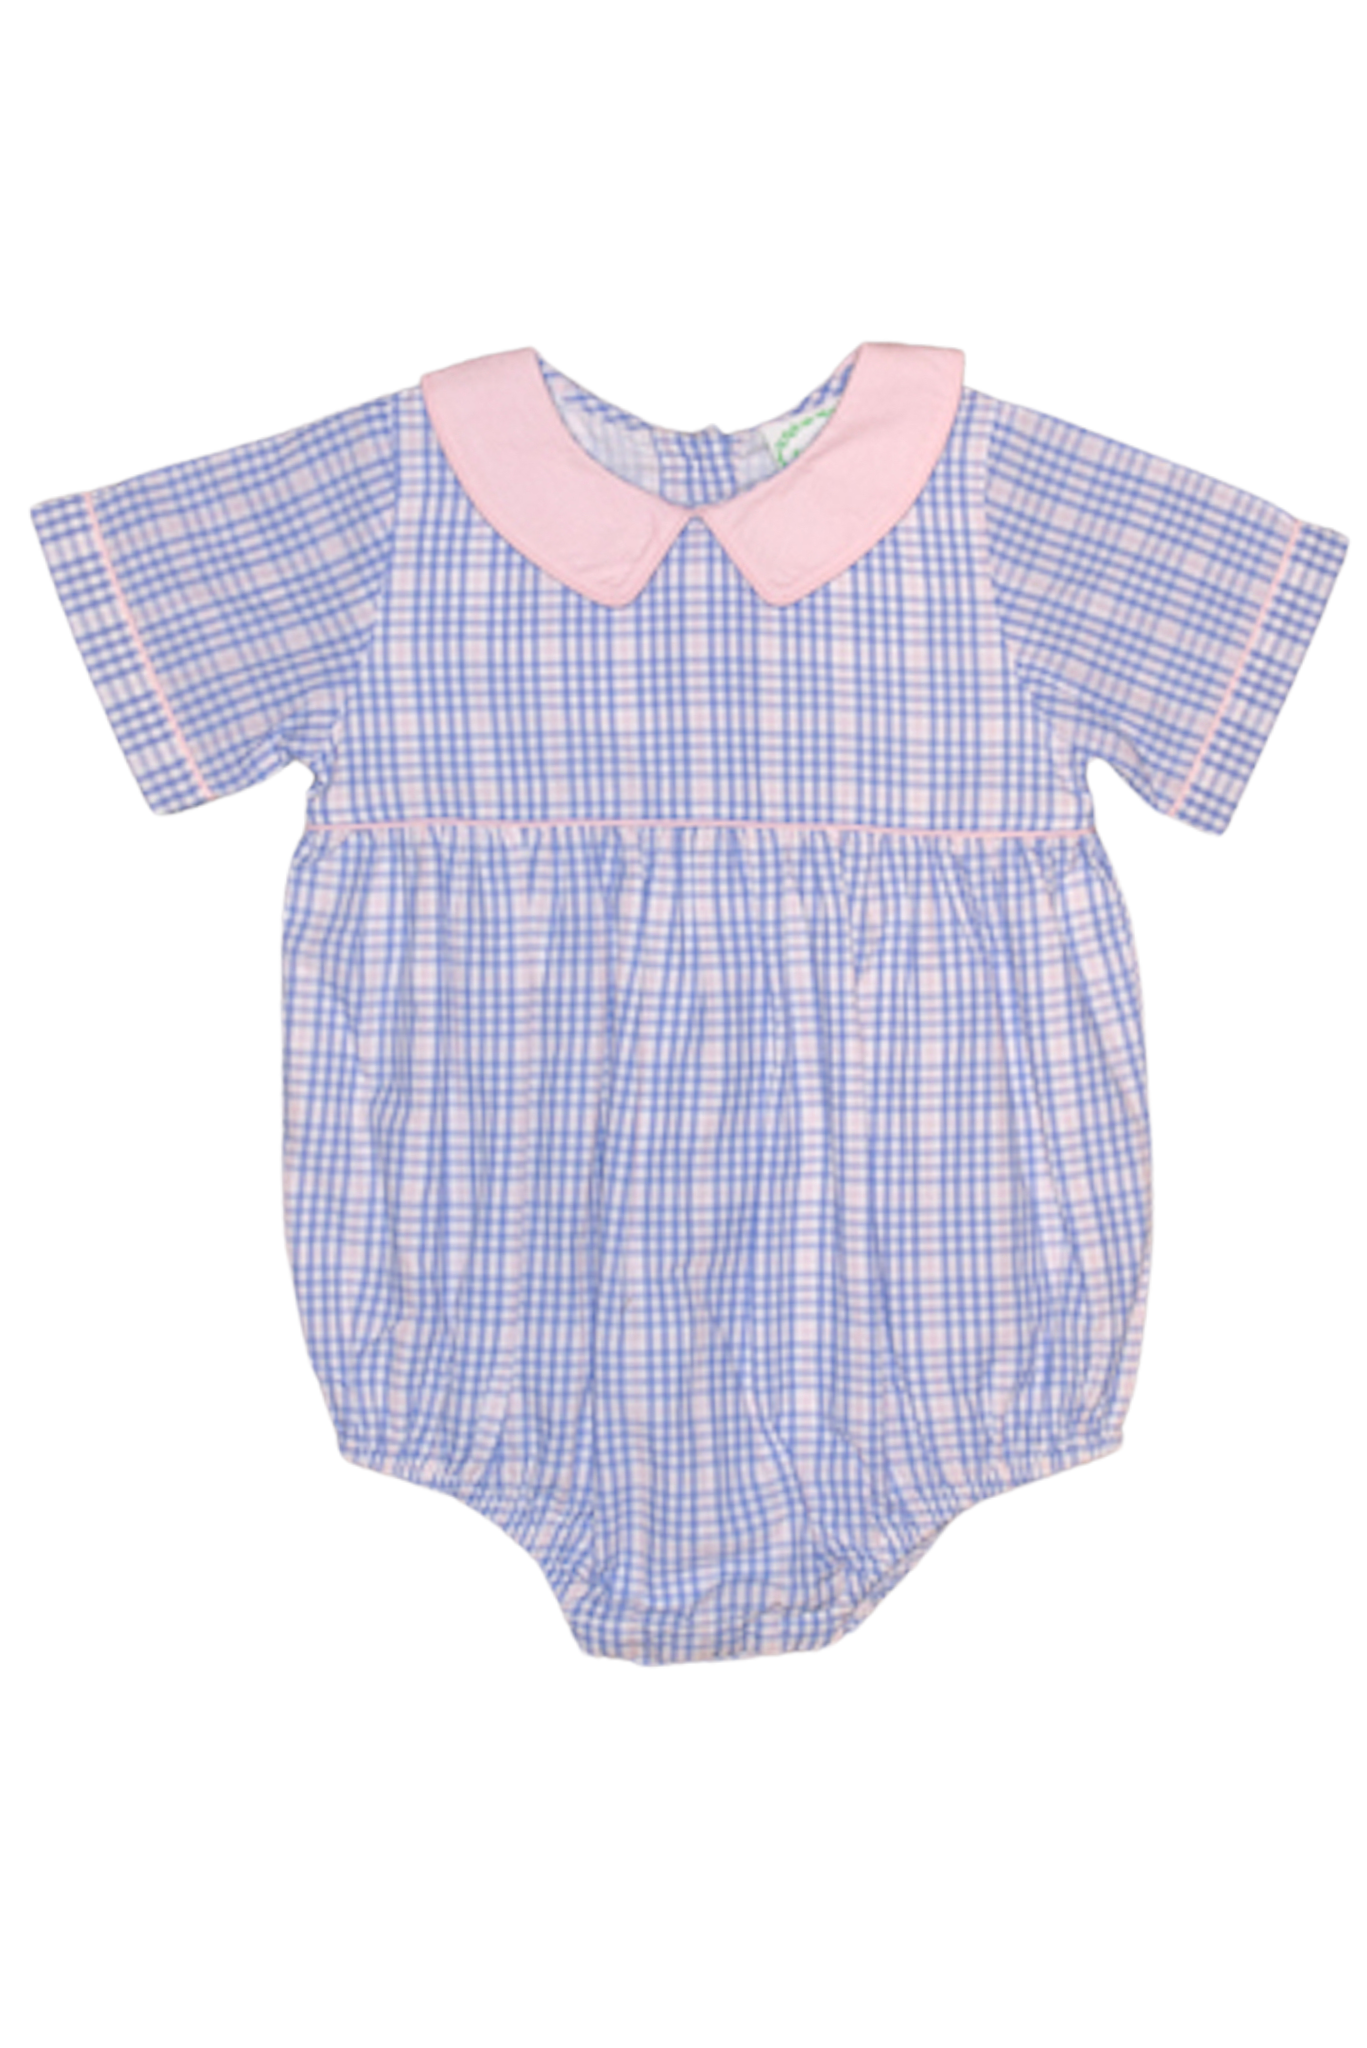 Boy's Pink and Blue Plaid Bubble